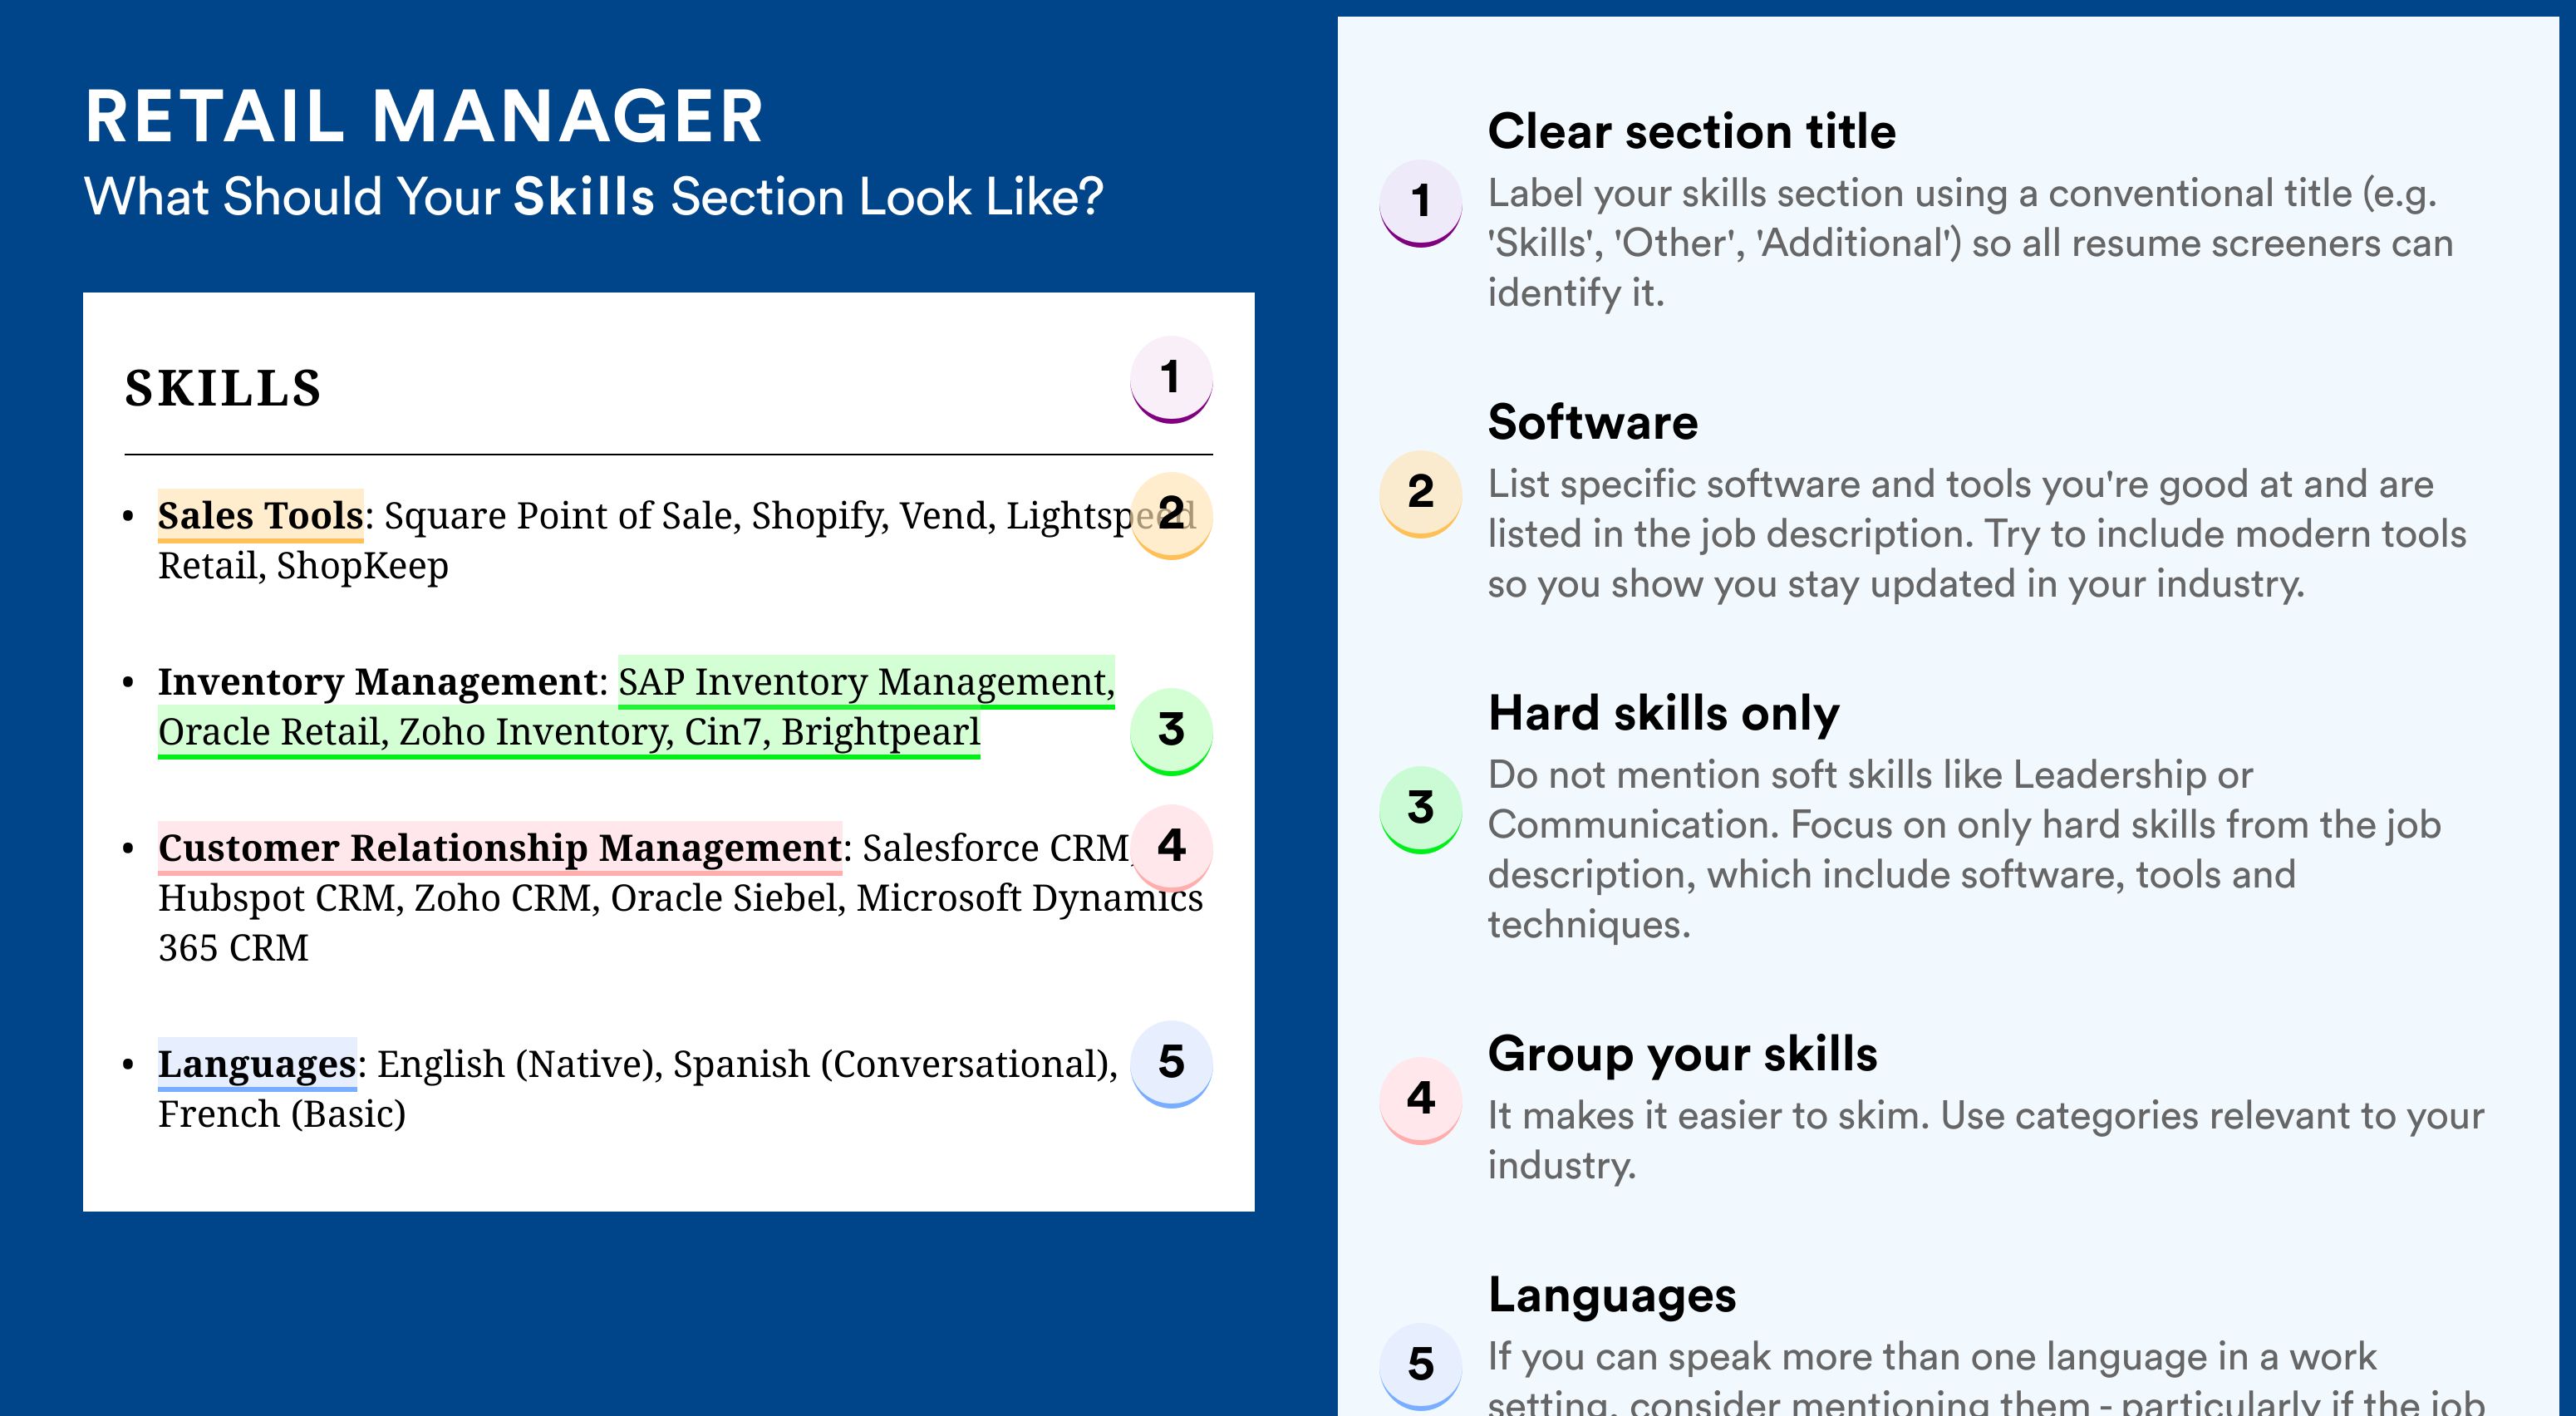 How To Write Your Skills Section - Retail Manager Roles